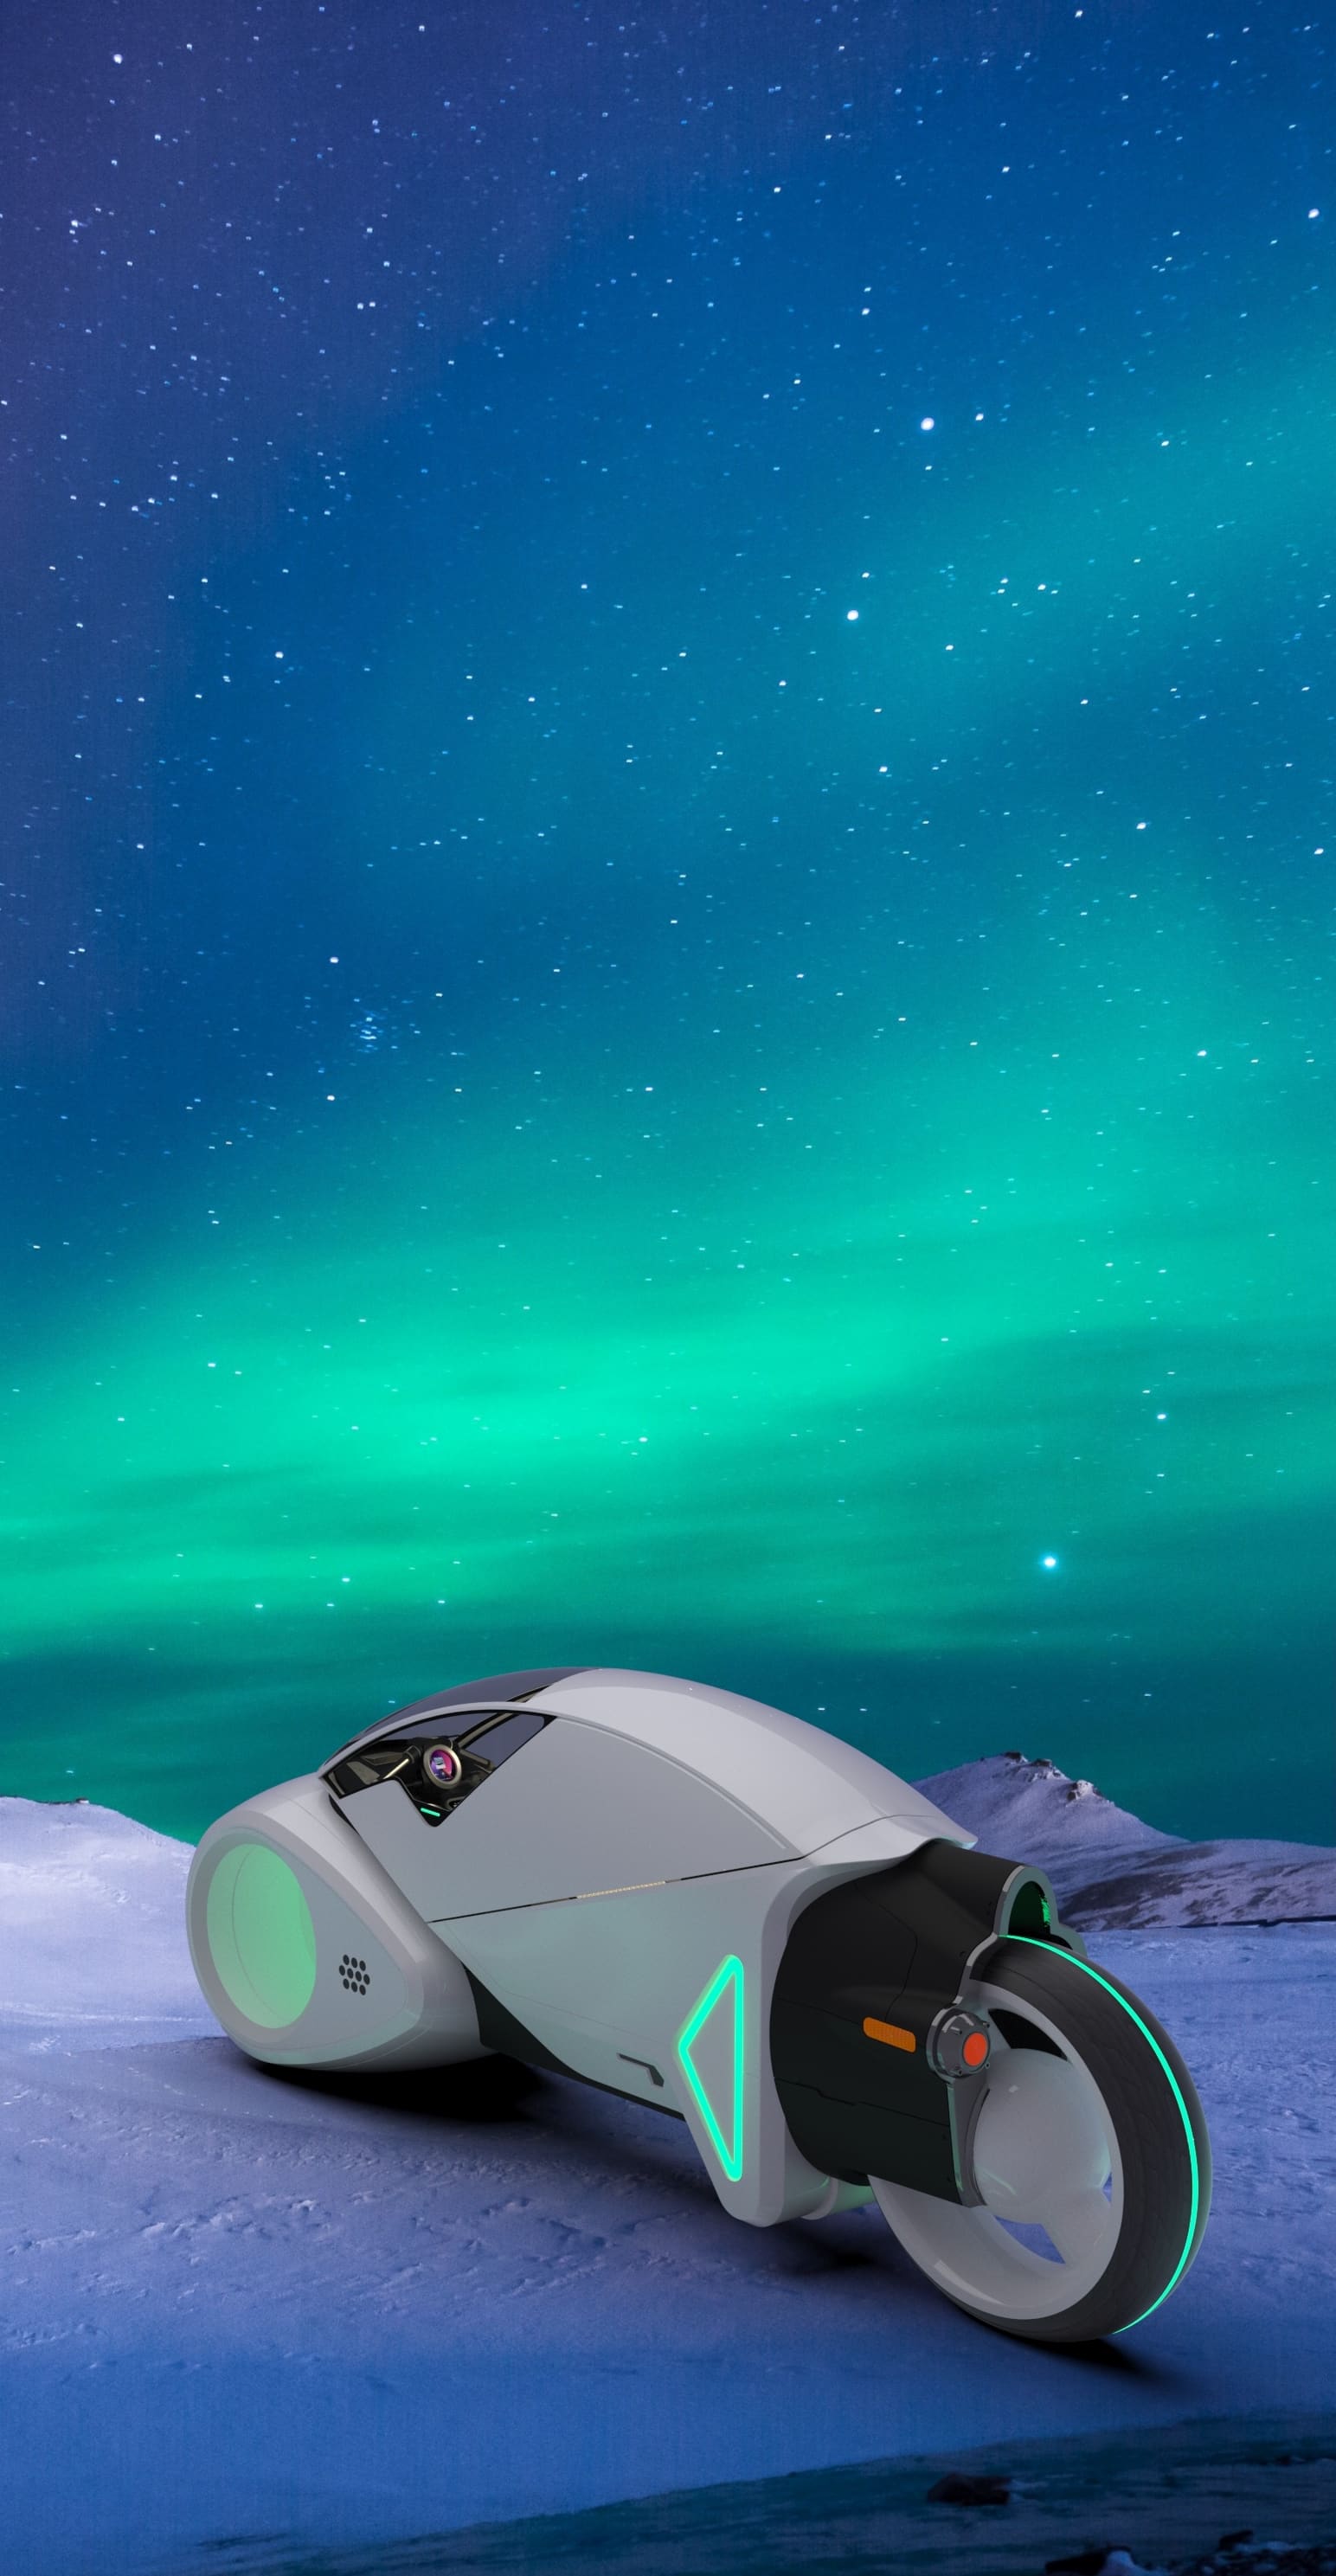 Smoove motorcycle under the northern light.